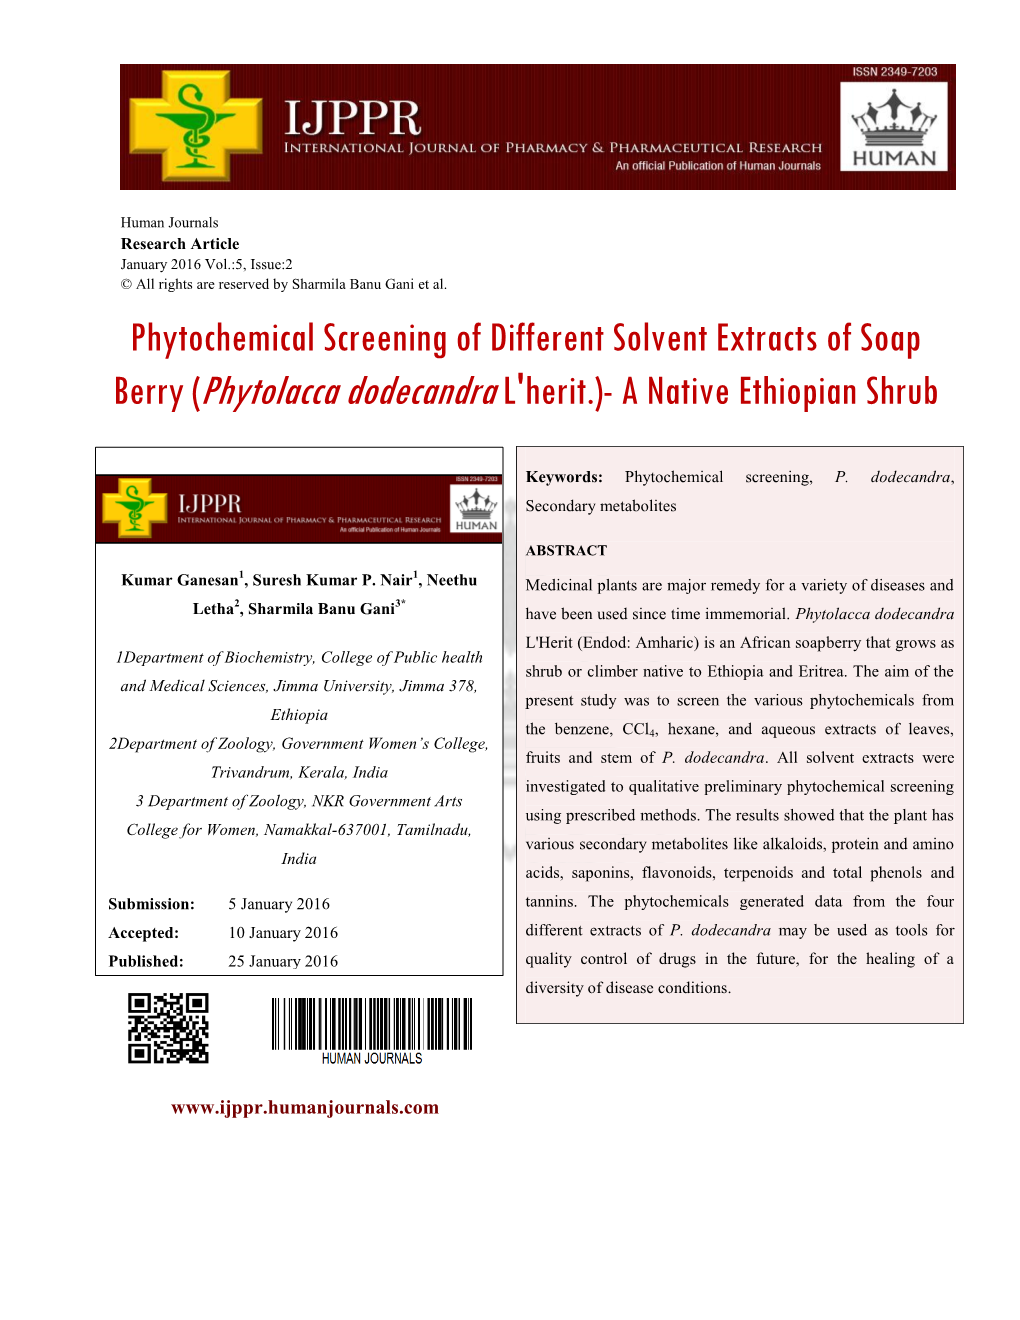 Phytochemical Screening of Different Solvent Extracts of Soap Berry (Phytolacca Dodecandra L'herit.)- a Native Ethiopian Shrub